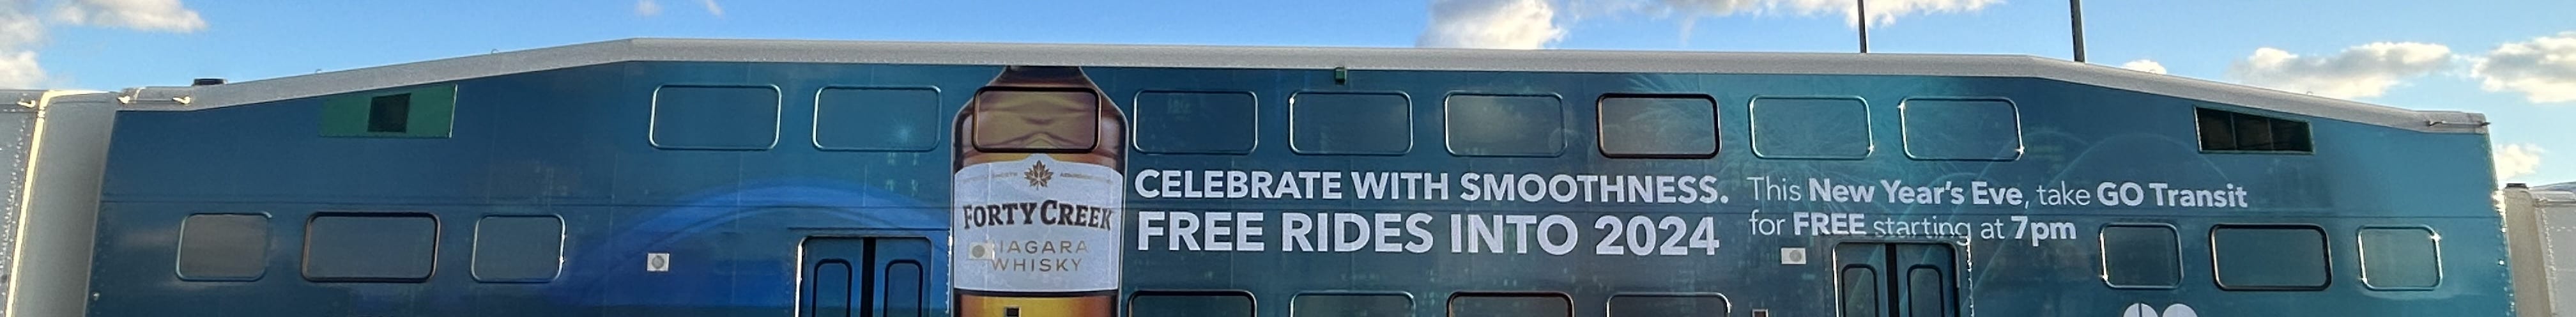 Train wrap promoting free GO rides for NYE courtesy of Forty Creek Whisky.